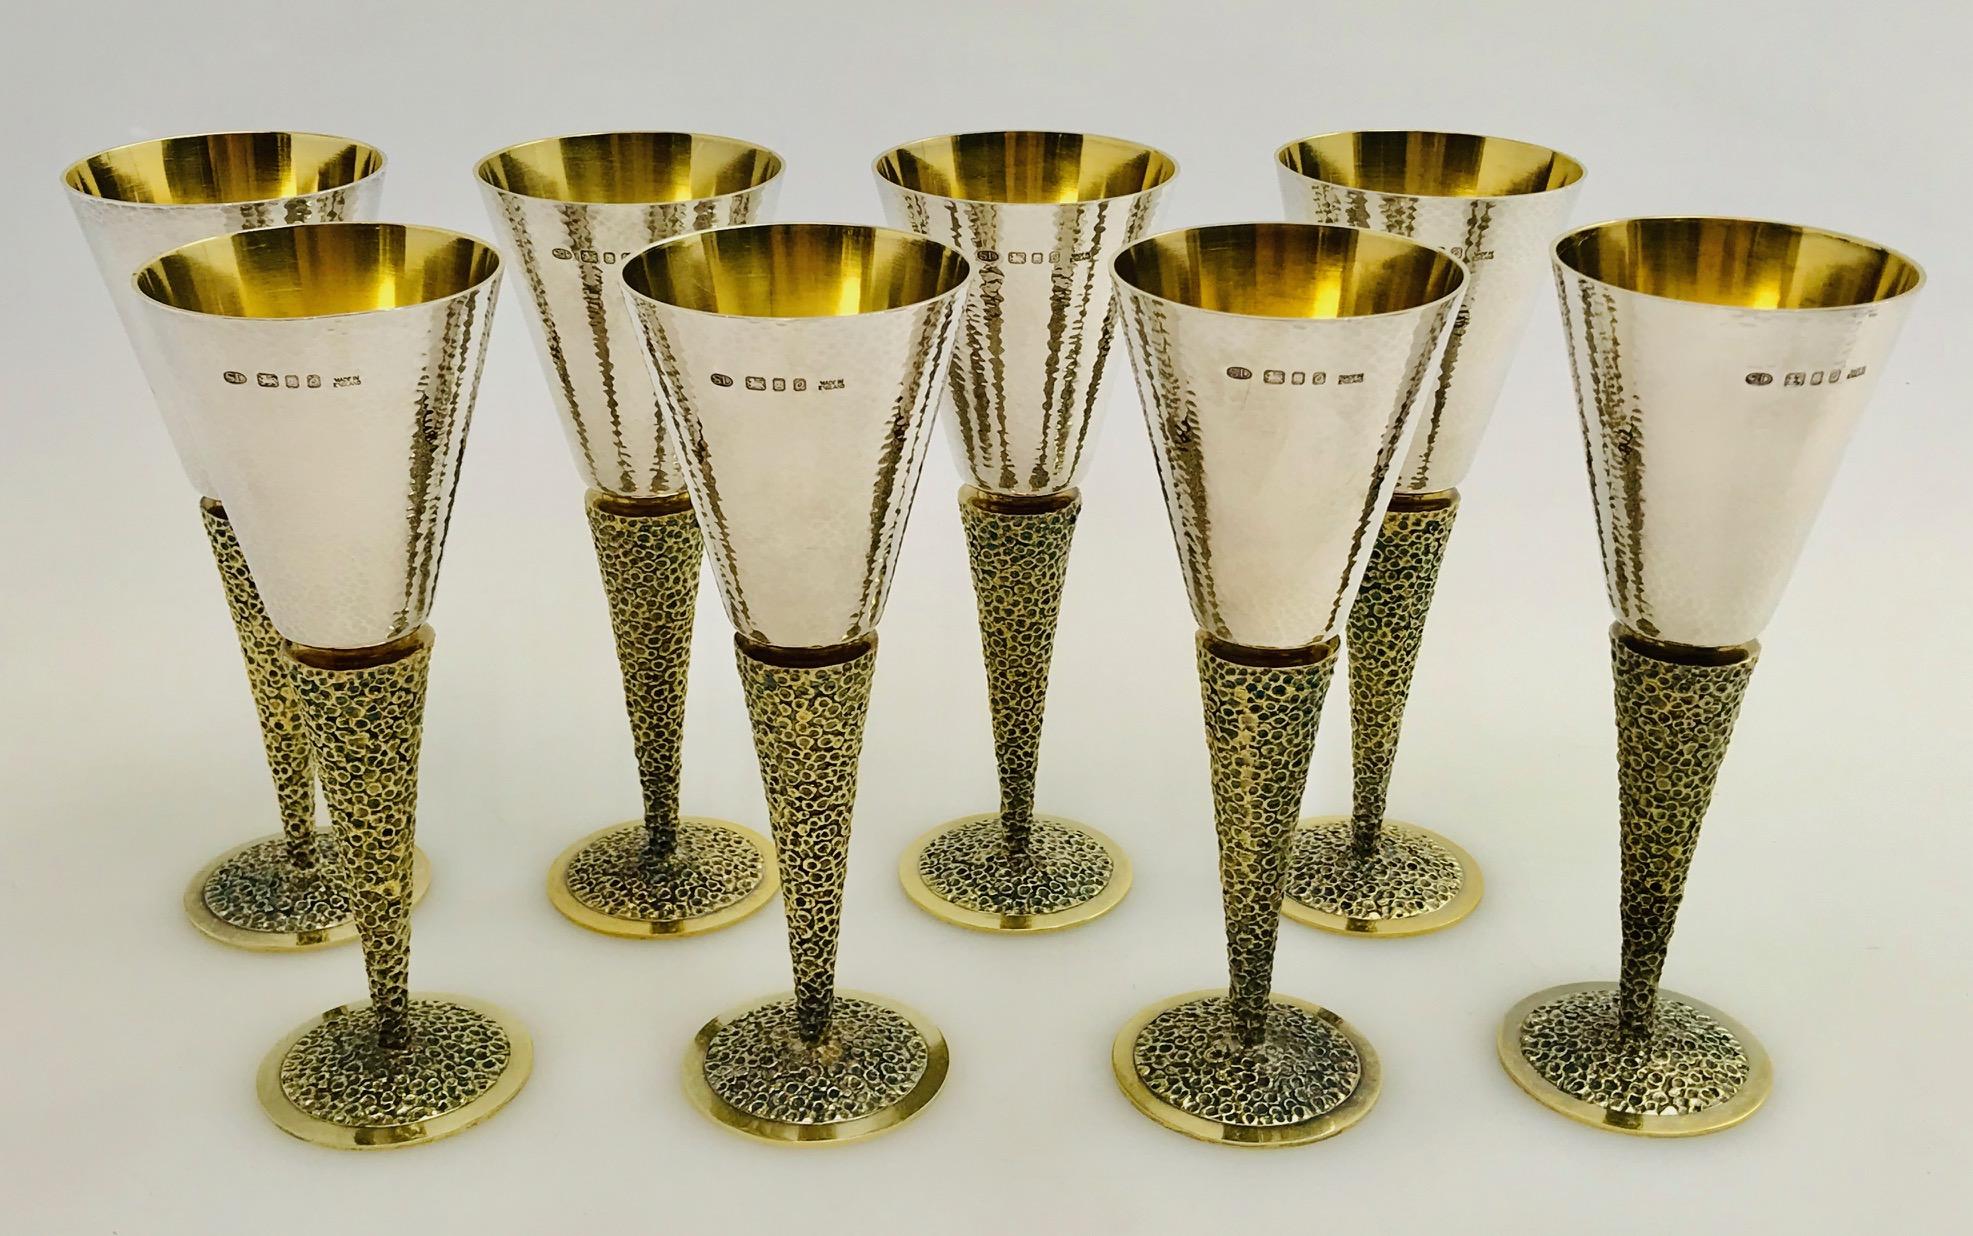 A set of 8 silver goblets made by the renowned English silversmith Stuart Devlin in London, 1969.
The stem is wonderfully textured and finished in silver-gilt and the bowls have a delightful hammered finish.